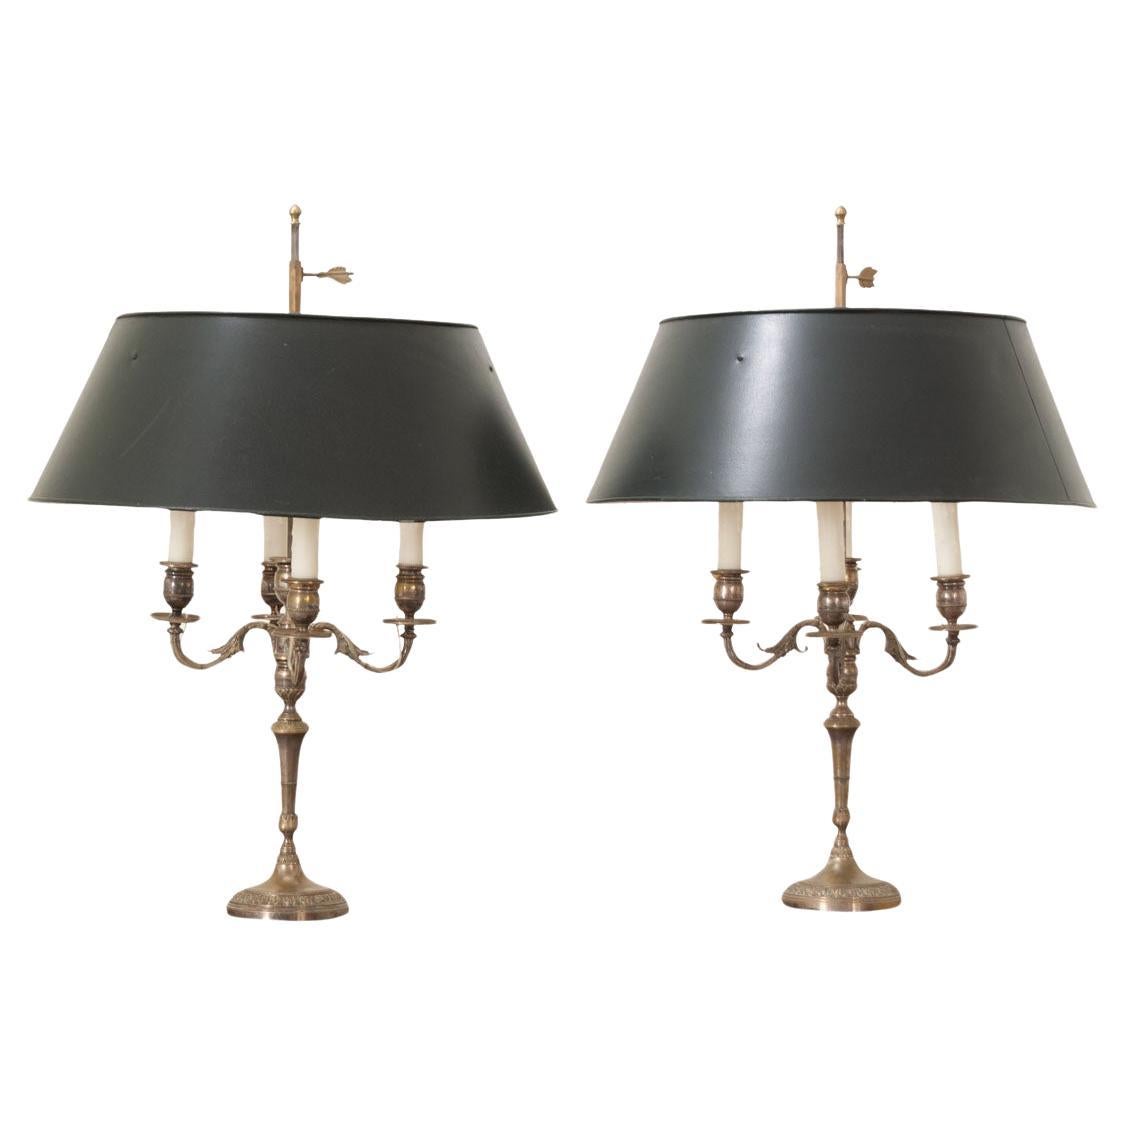 Pair of Candelabra Lamps in the Bouillotte Style For Sale